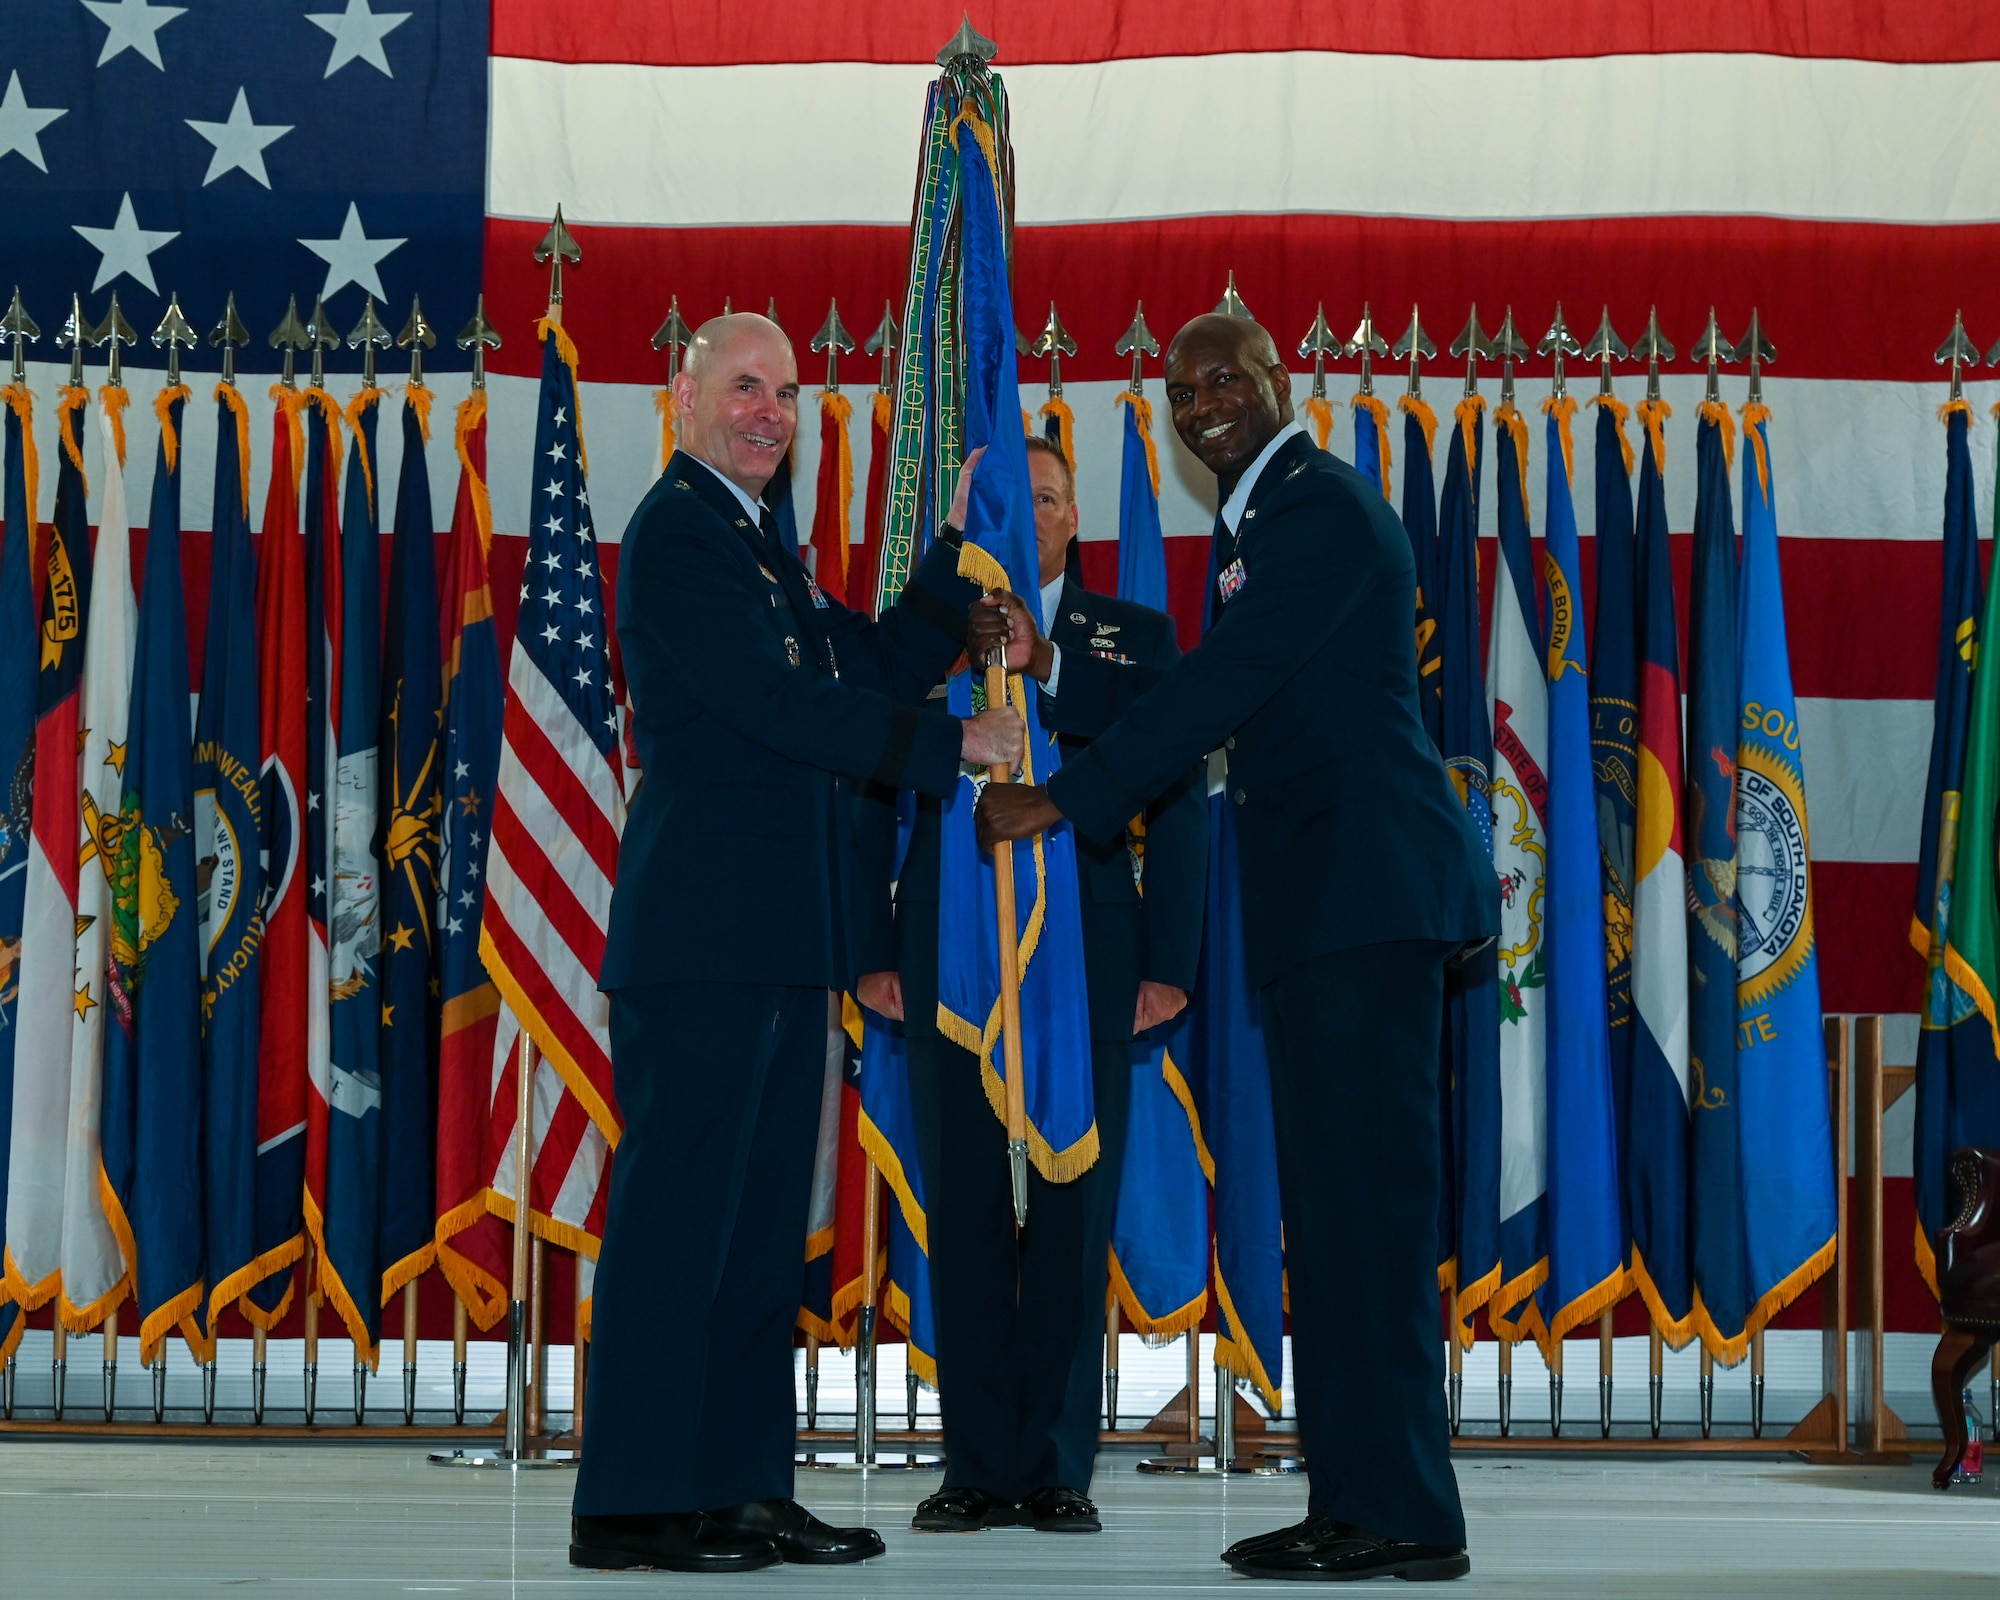 Col. Kenneth McGhee, incoming 91st Missile Wing commander, receives the guidon from Maj. Gen. Michael Lutton, 20th Air Force commander at Minot Air Force Base, North Dakota, June 06, 2022. Prior to taking command of the 91st Missile Wing, McGee was commander of the 341st Operations group at Malmstrom Air Force Base, Montana. (U.S. Air Force photo by Airman 1st Class Evan Lichtenhan)